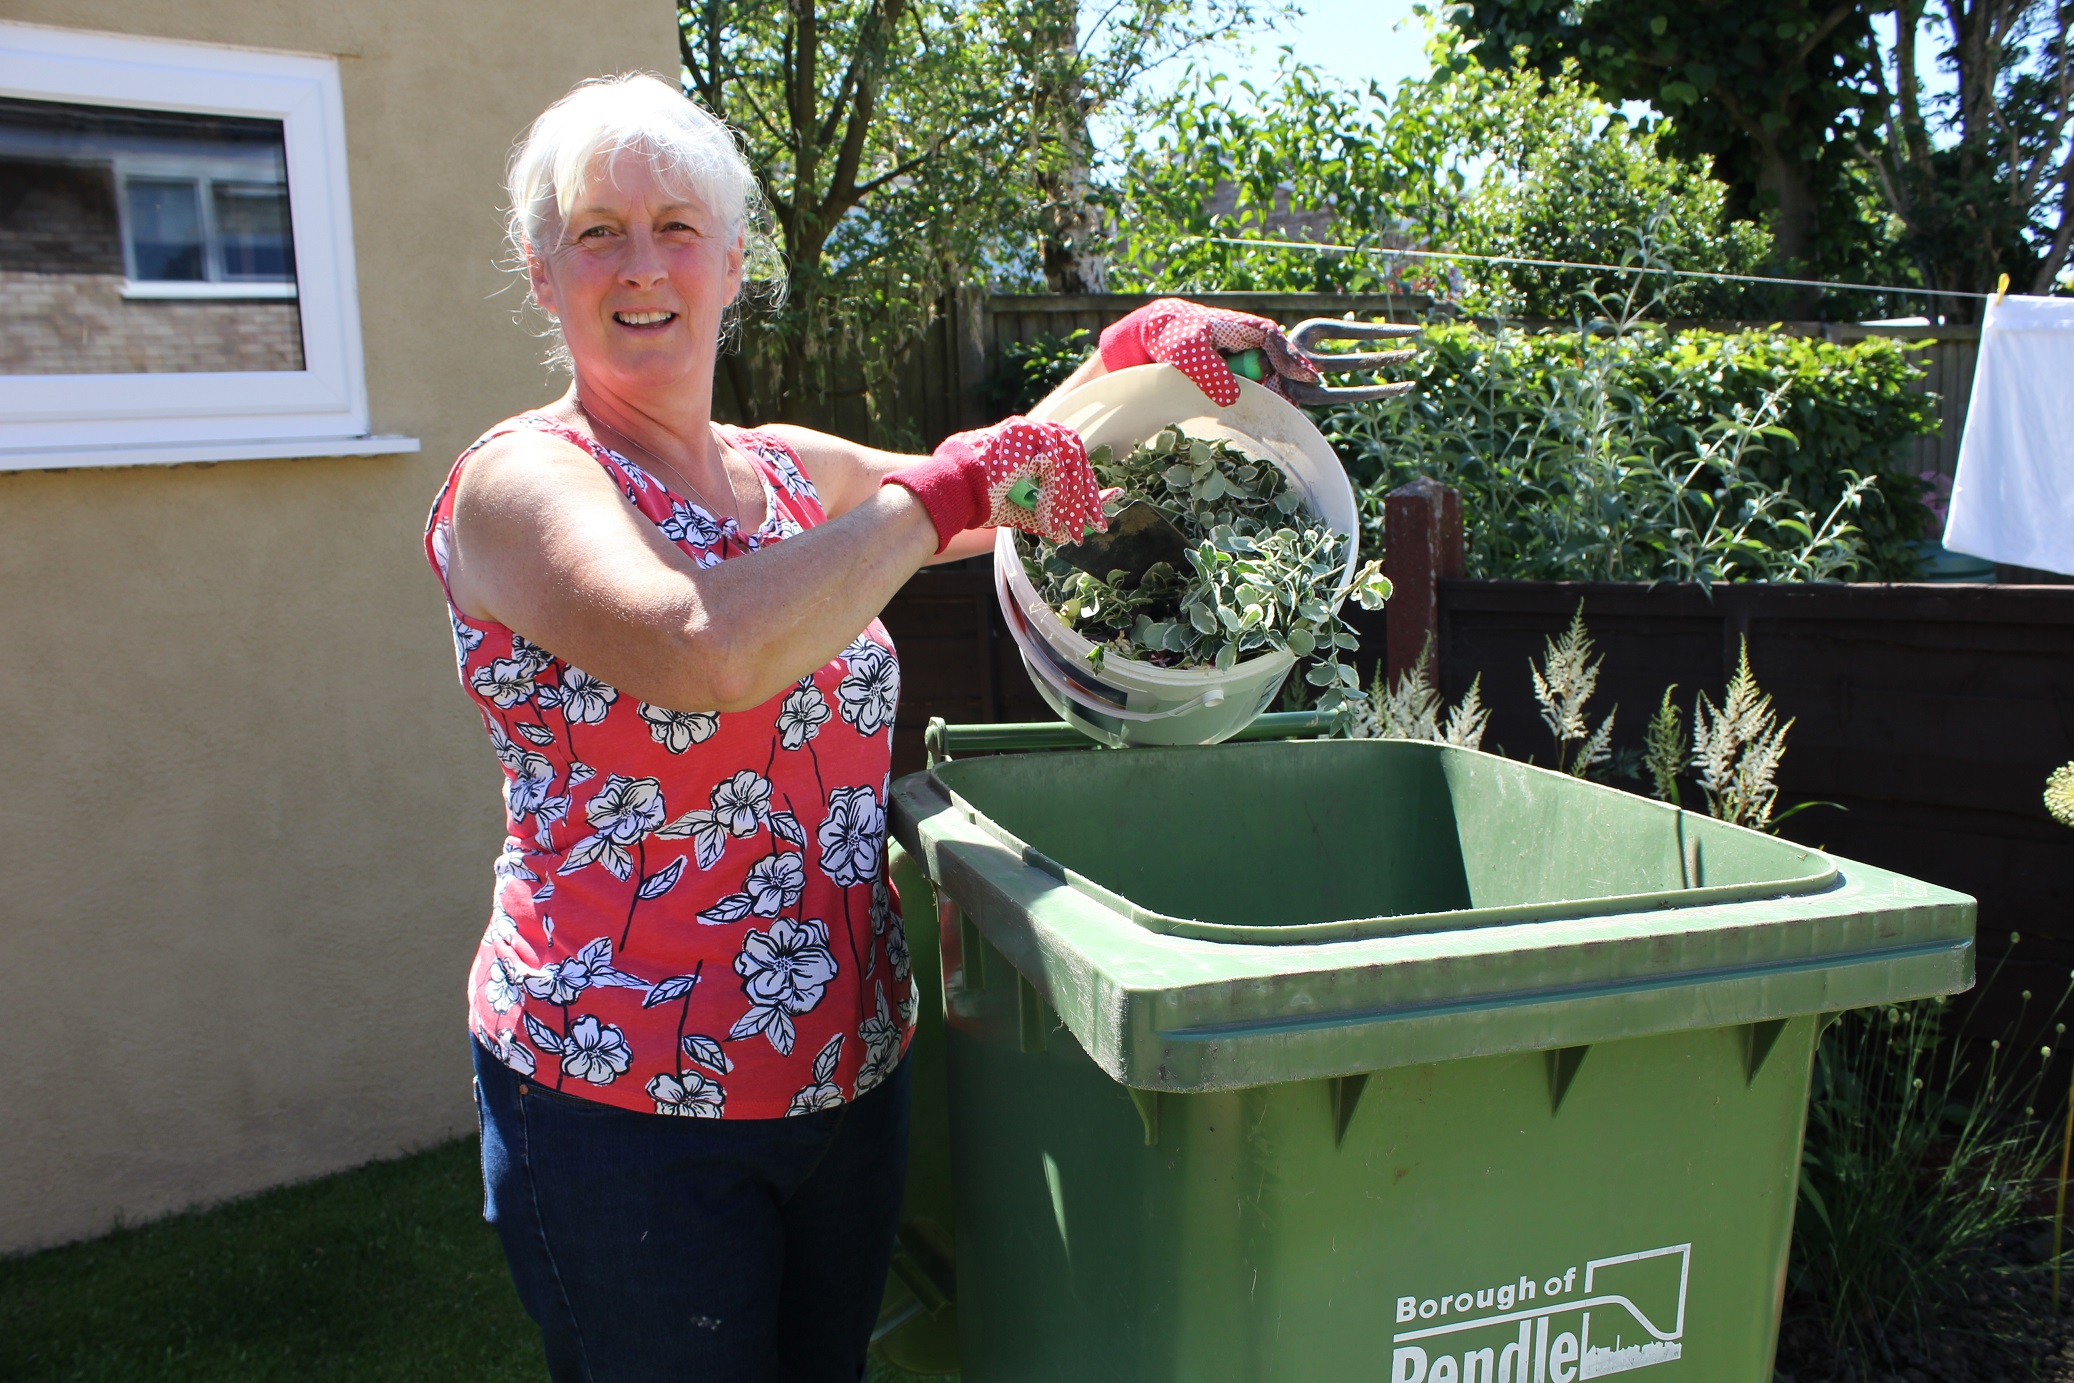 Not too late for gardeners to go green for Pendle!